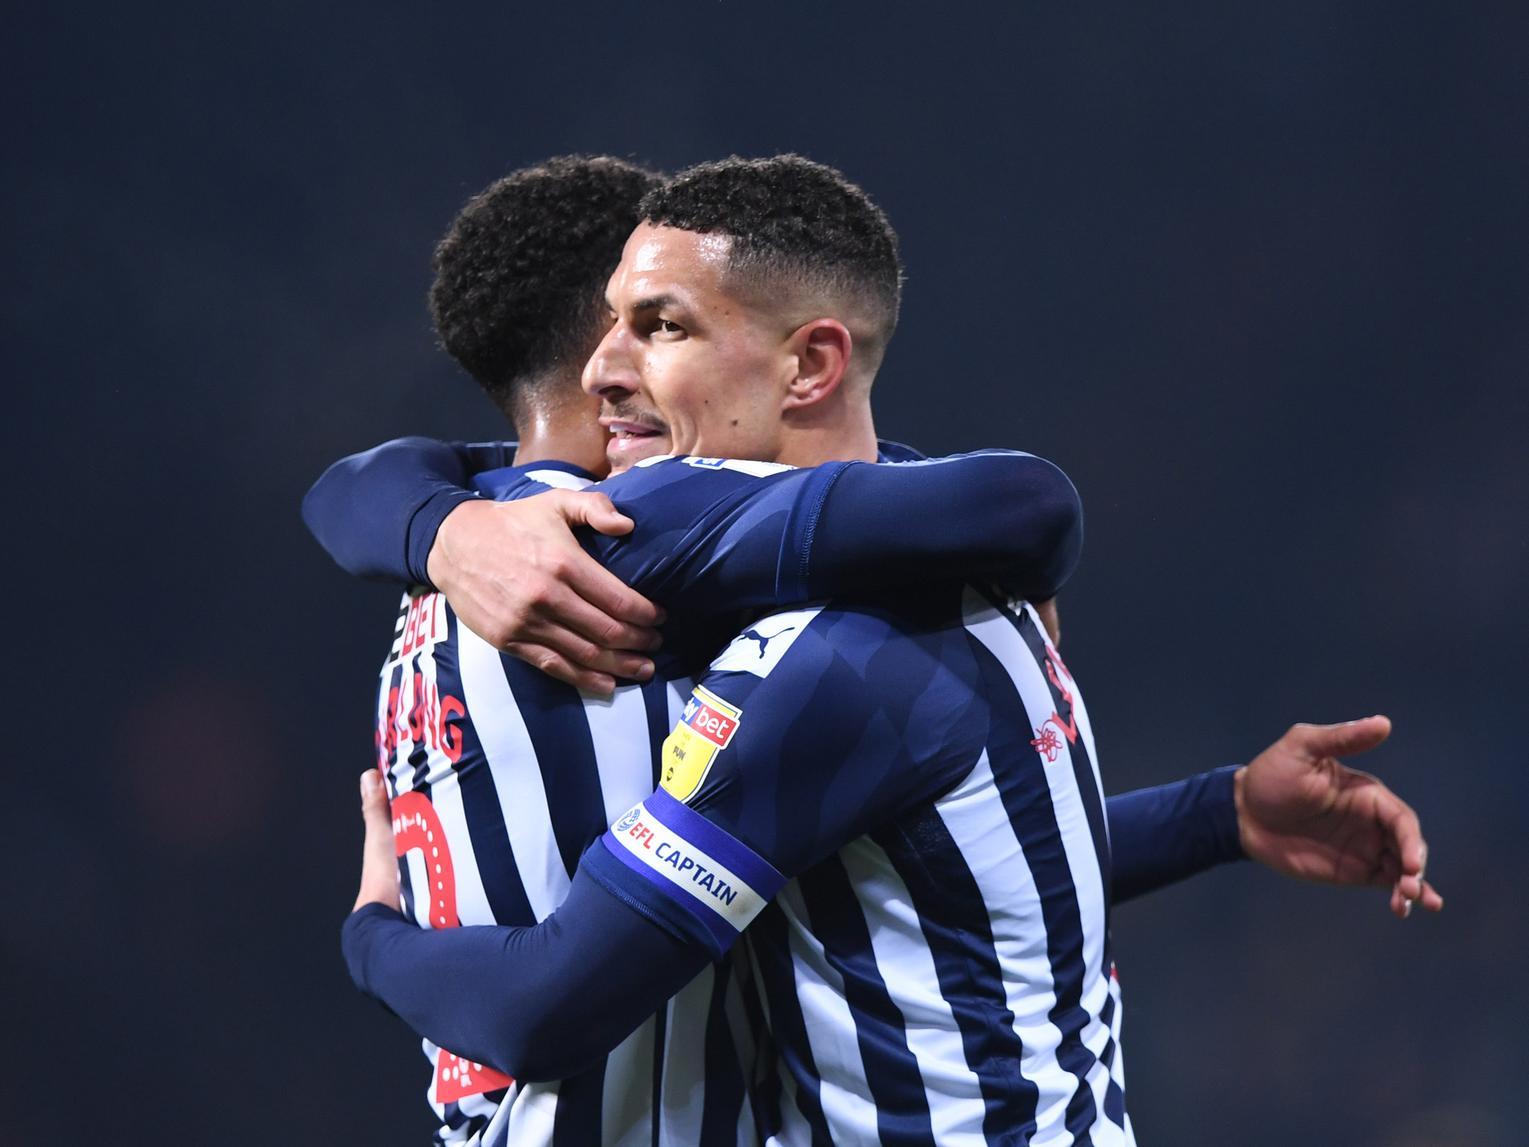 The Baggies look absolutely unstoppable at the moment, and continued their drive towards the title with a confident 4-0 win. Slaven Bilic was delighted, but said he was disappointed they didn't score even more goals. Crikey.